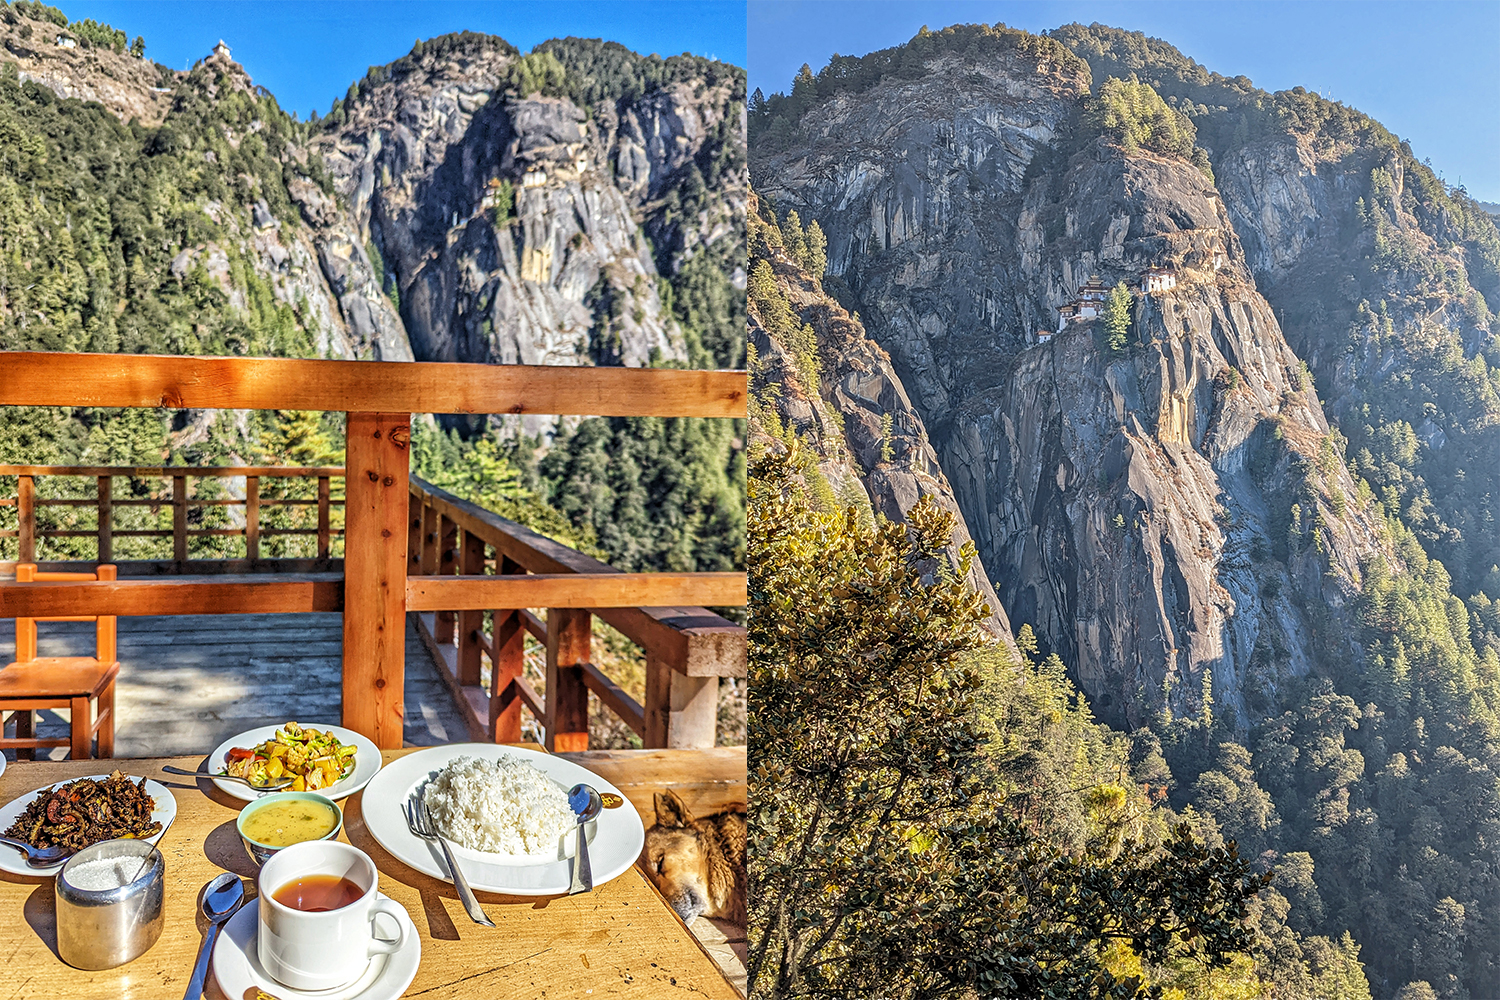 A meal at Taktsang Cafeteria in Bhutan on the left, on the right a view of Tiger's Nest Monastery on the mountainside